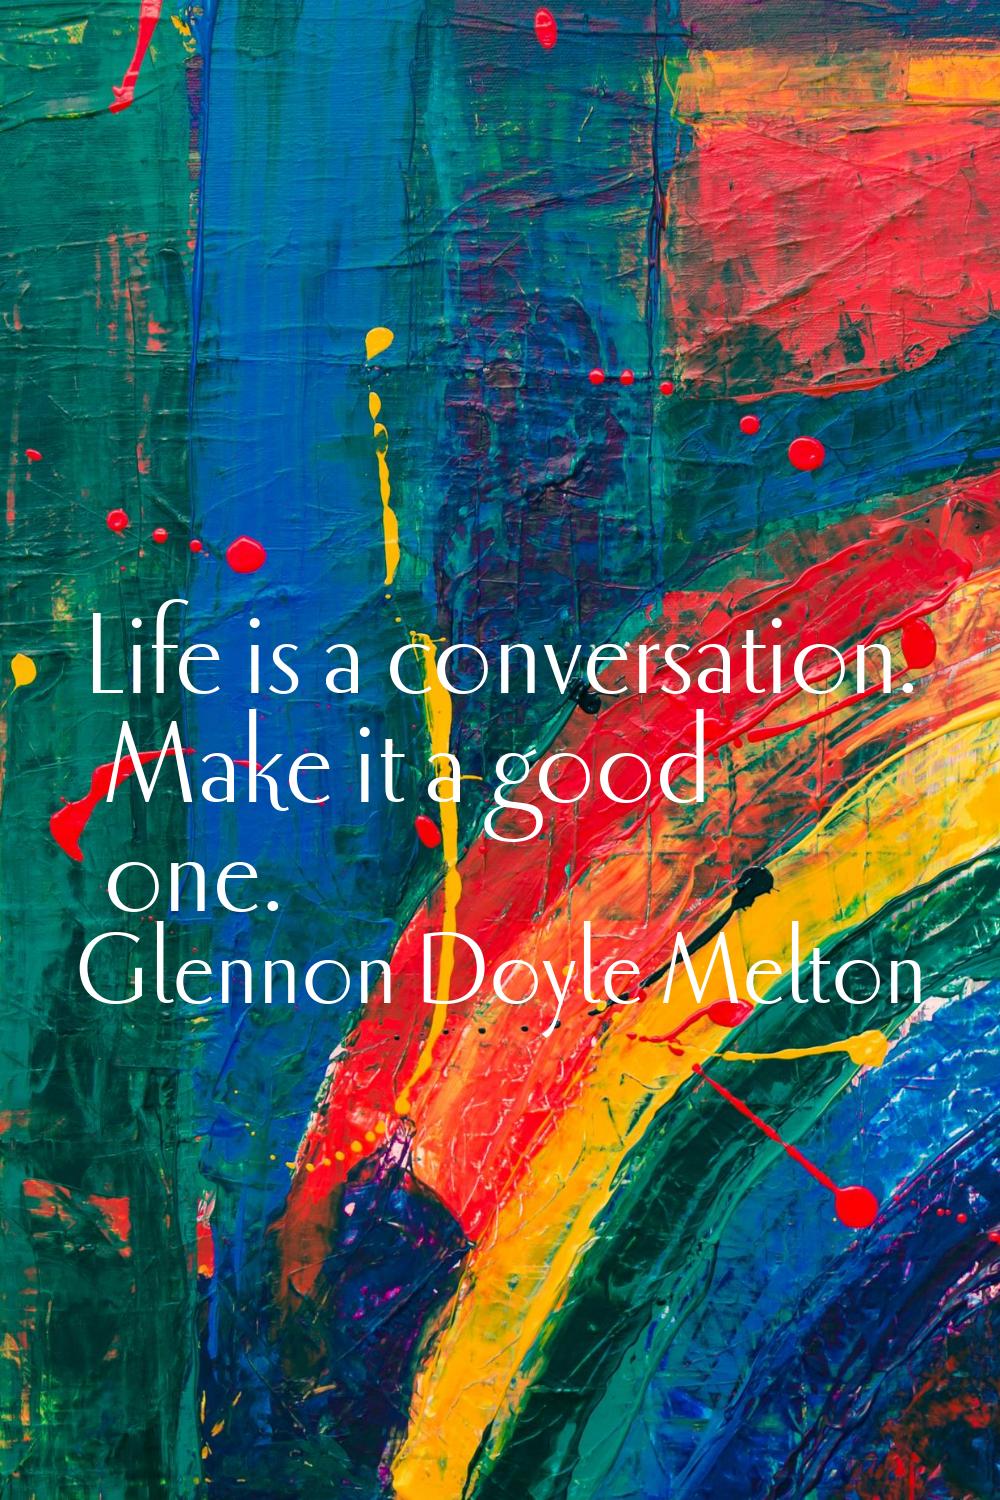 Life is a conversation. Make it a good one.